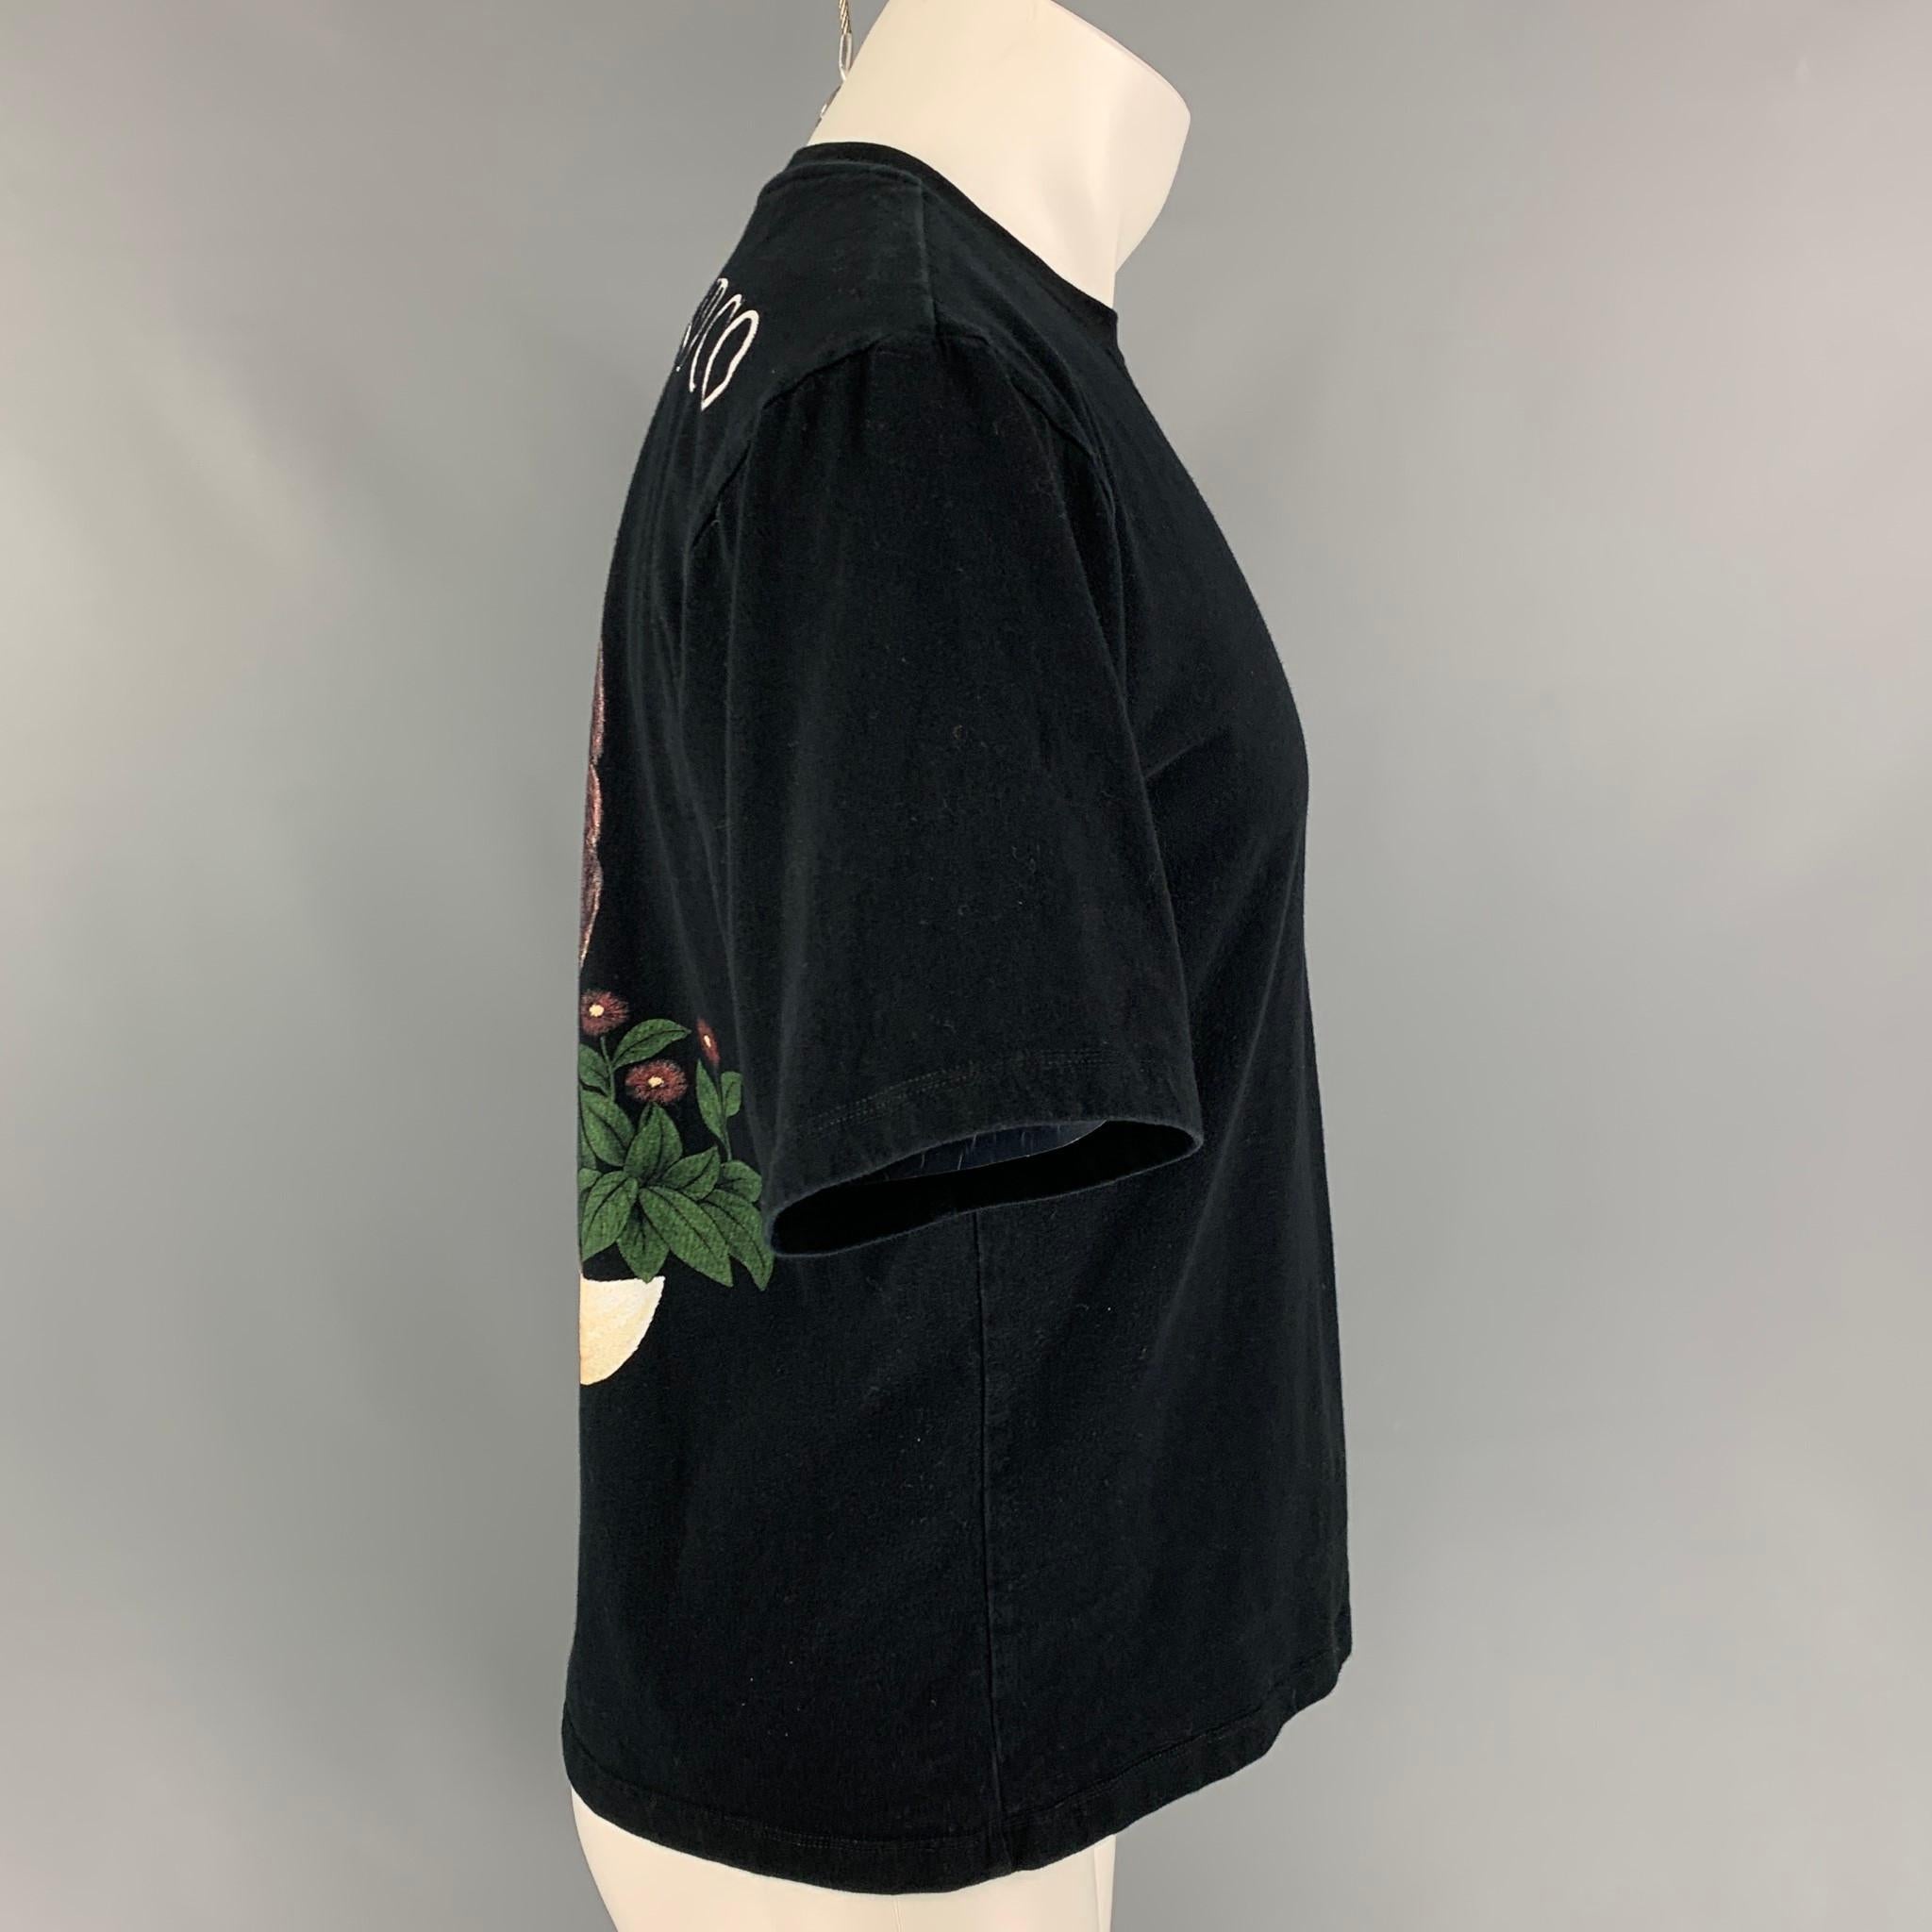 LOEWE t-shit comes in a black cotton with a front floral graphic featuring a back 'Morris Fox' graphic design and a crew-neck. 

Very Good Pre-Owned Condition.
Marked: S
Original Retail Price: $395.00

Measurements:

Shoulder: 19 in.
Chest: 38